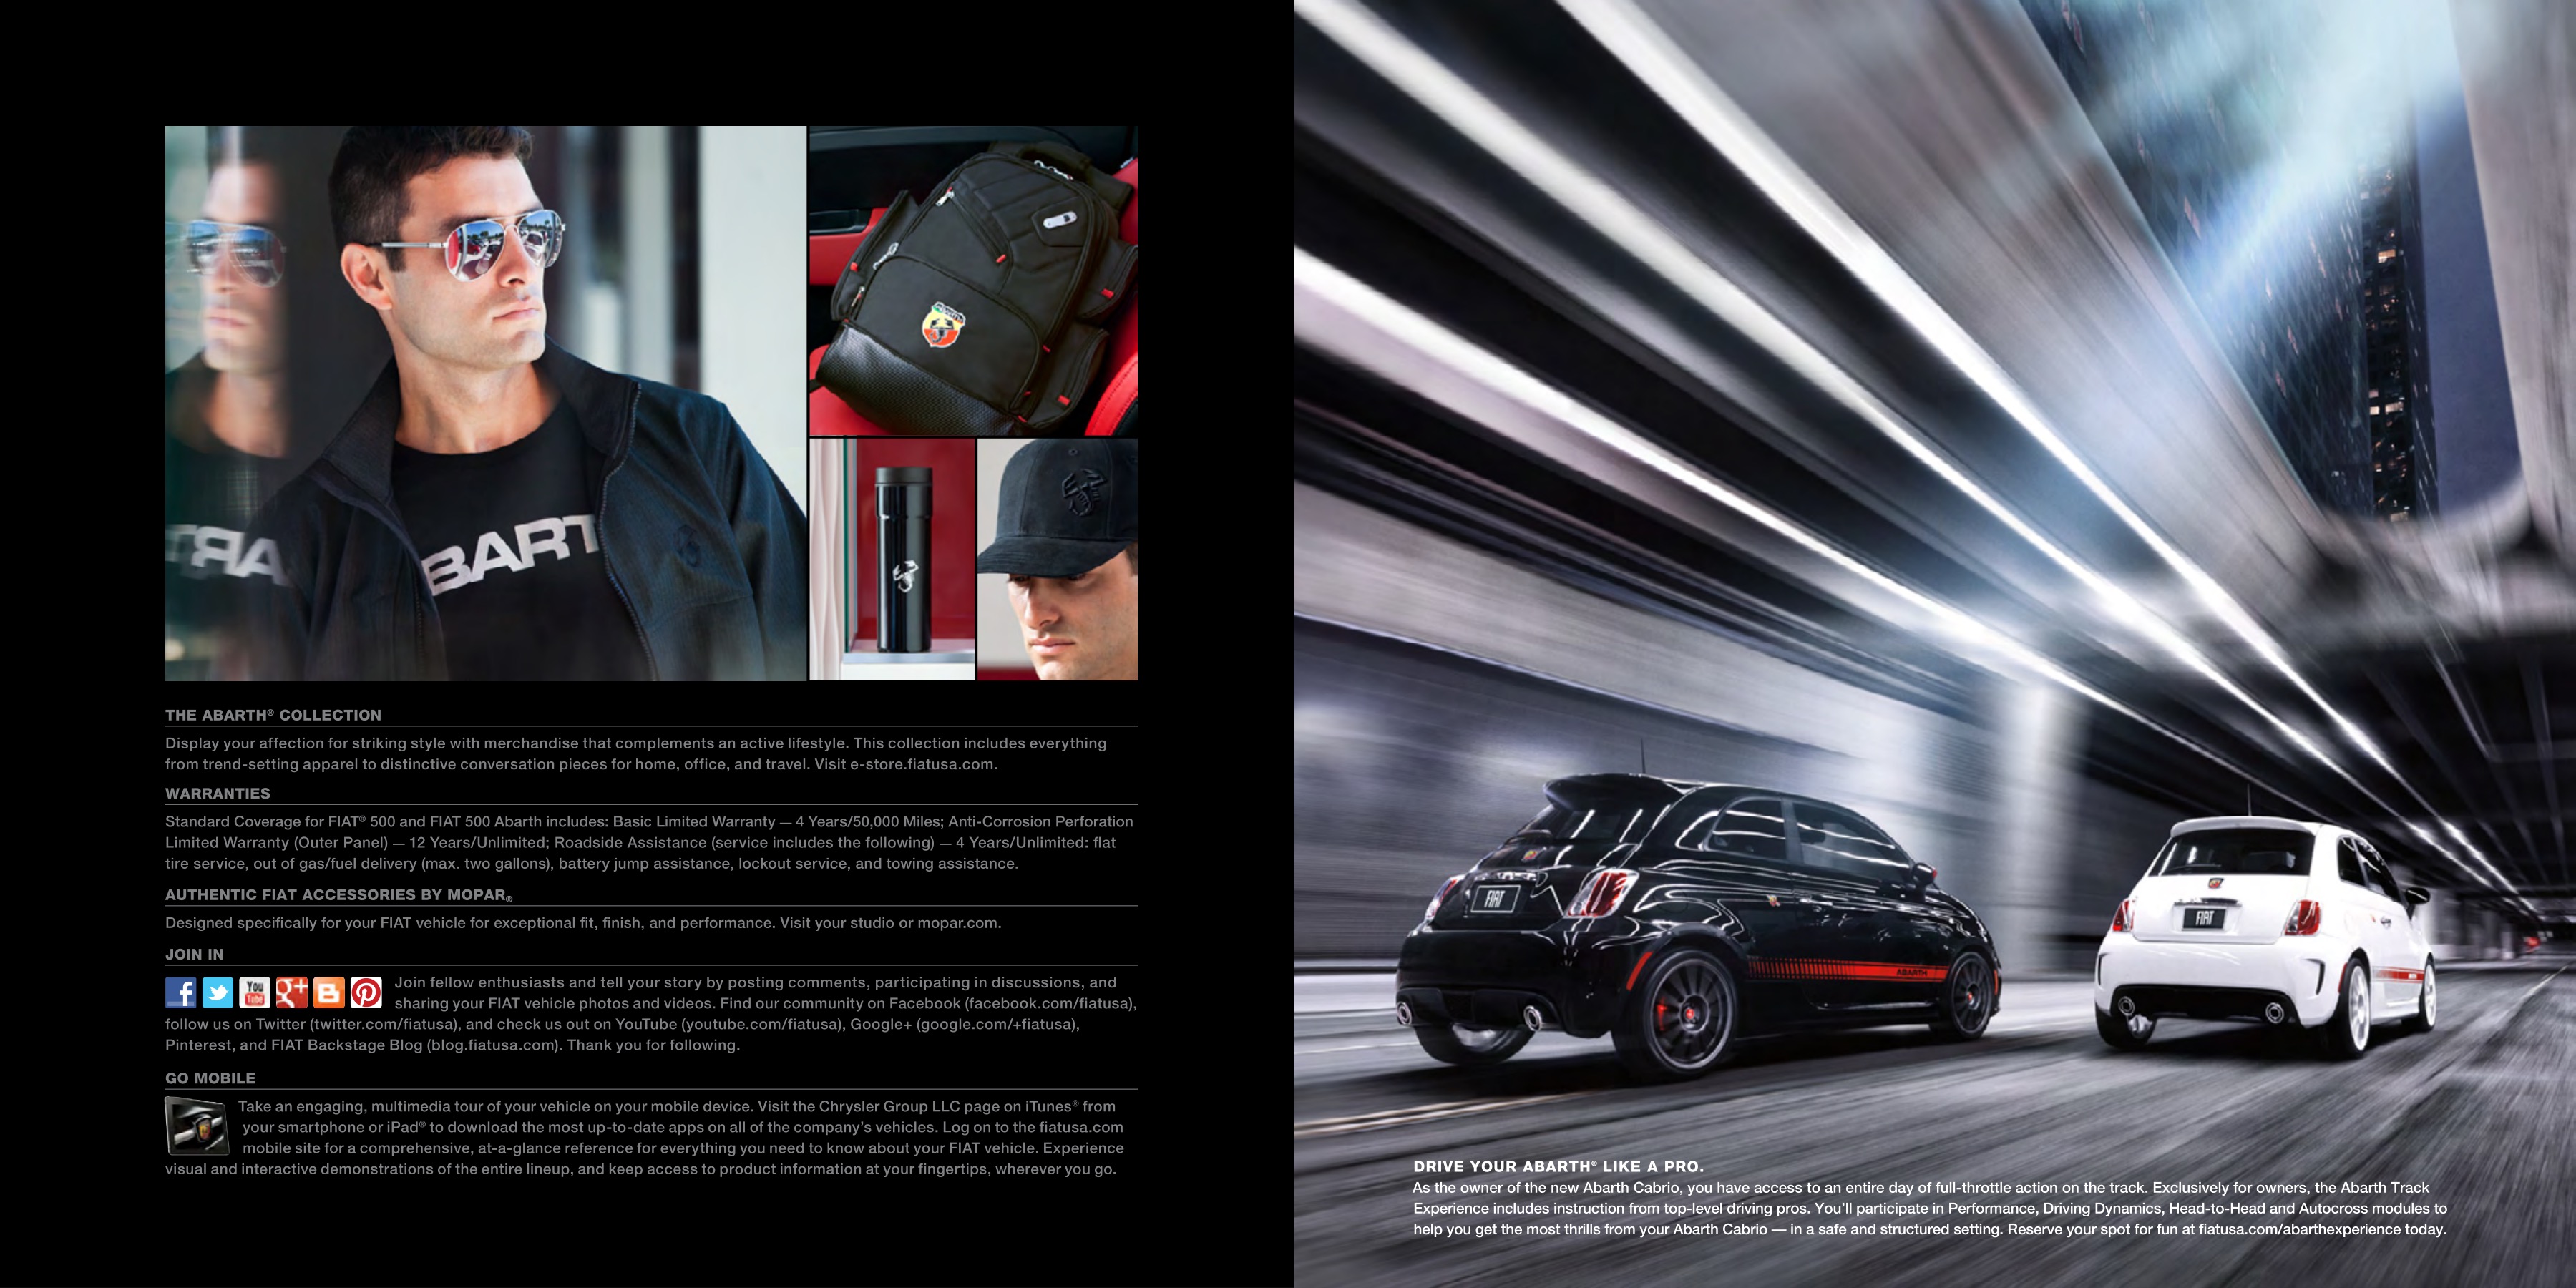 2014 Fiat 500 Abarth Brochure Page 16